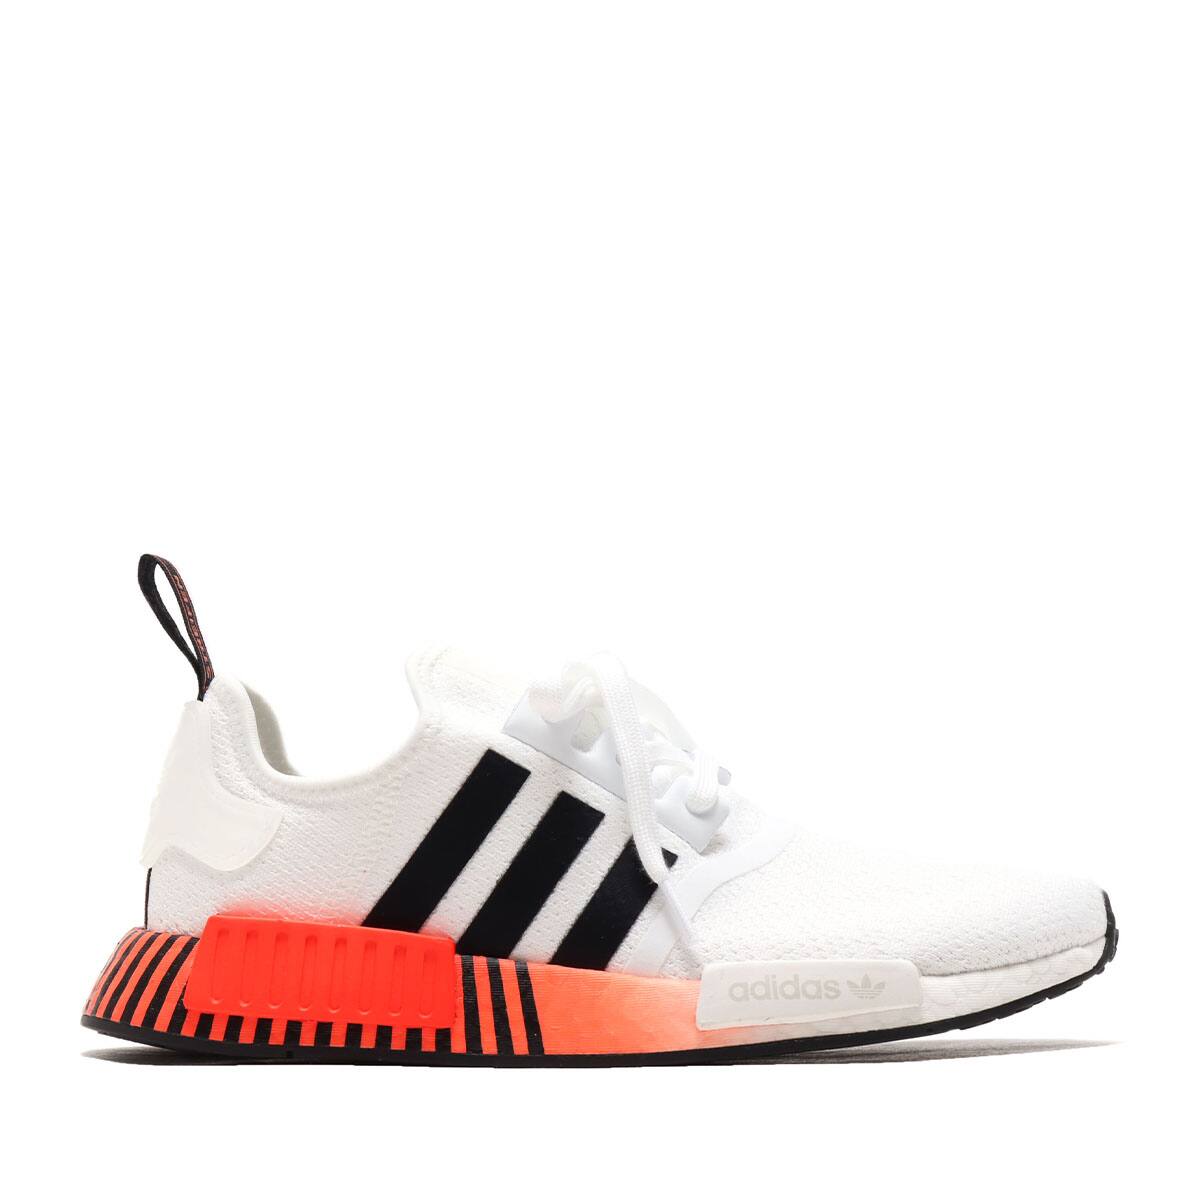 adidas NMD_R1 FOOTWEAR WHITE/CORE BLACK/SOLAR RED 20SS-I